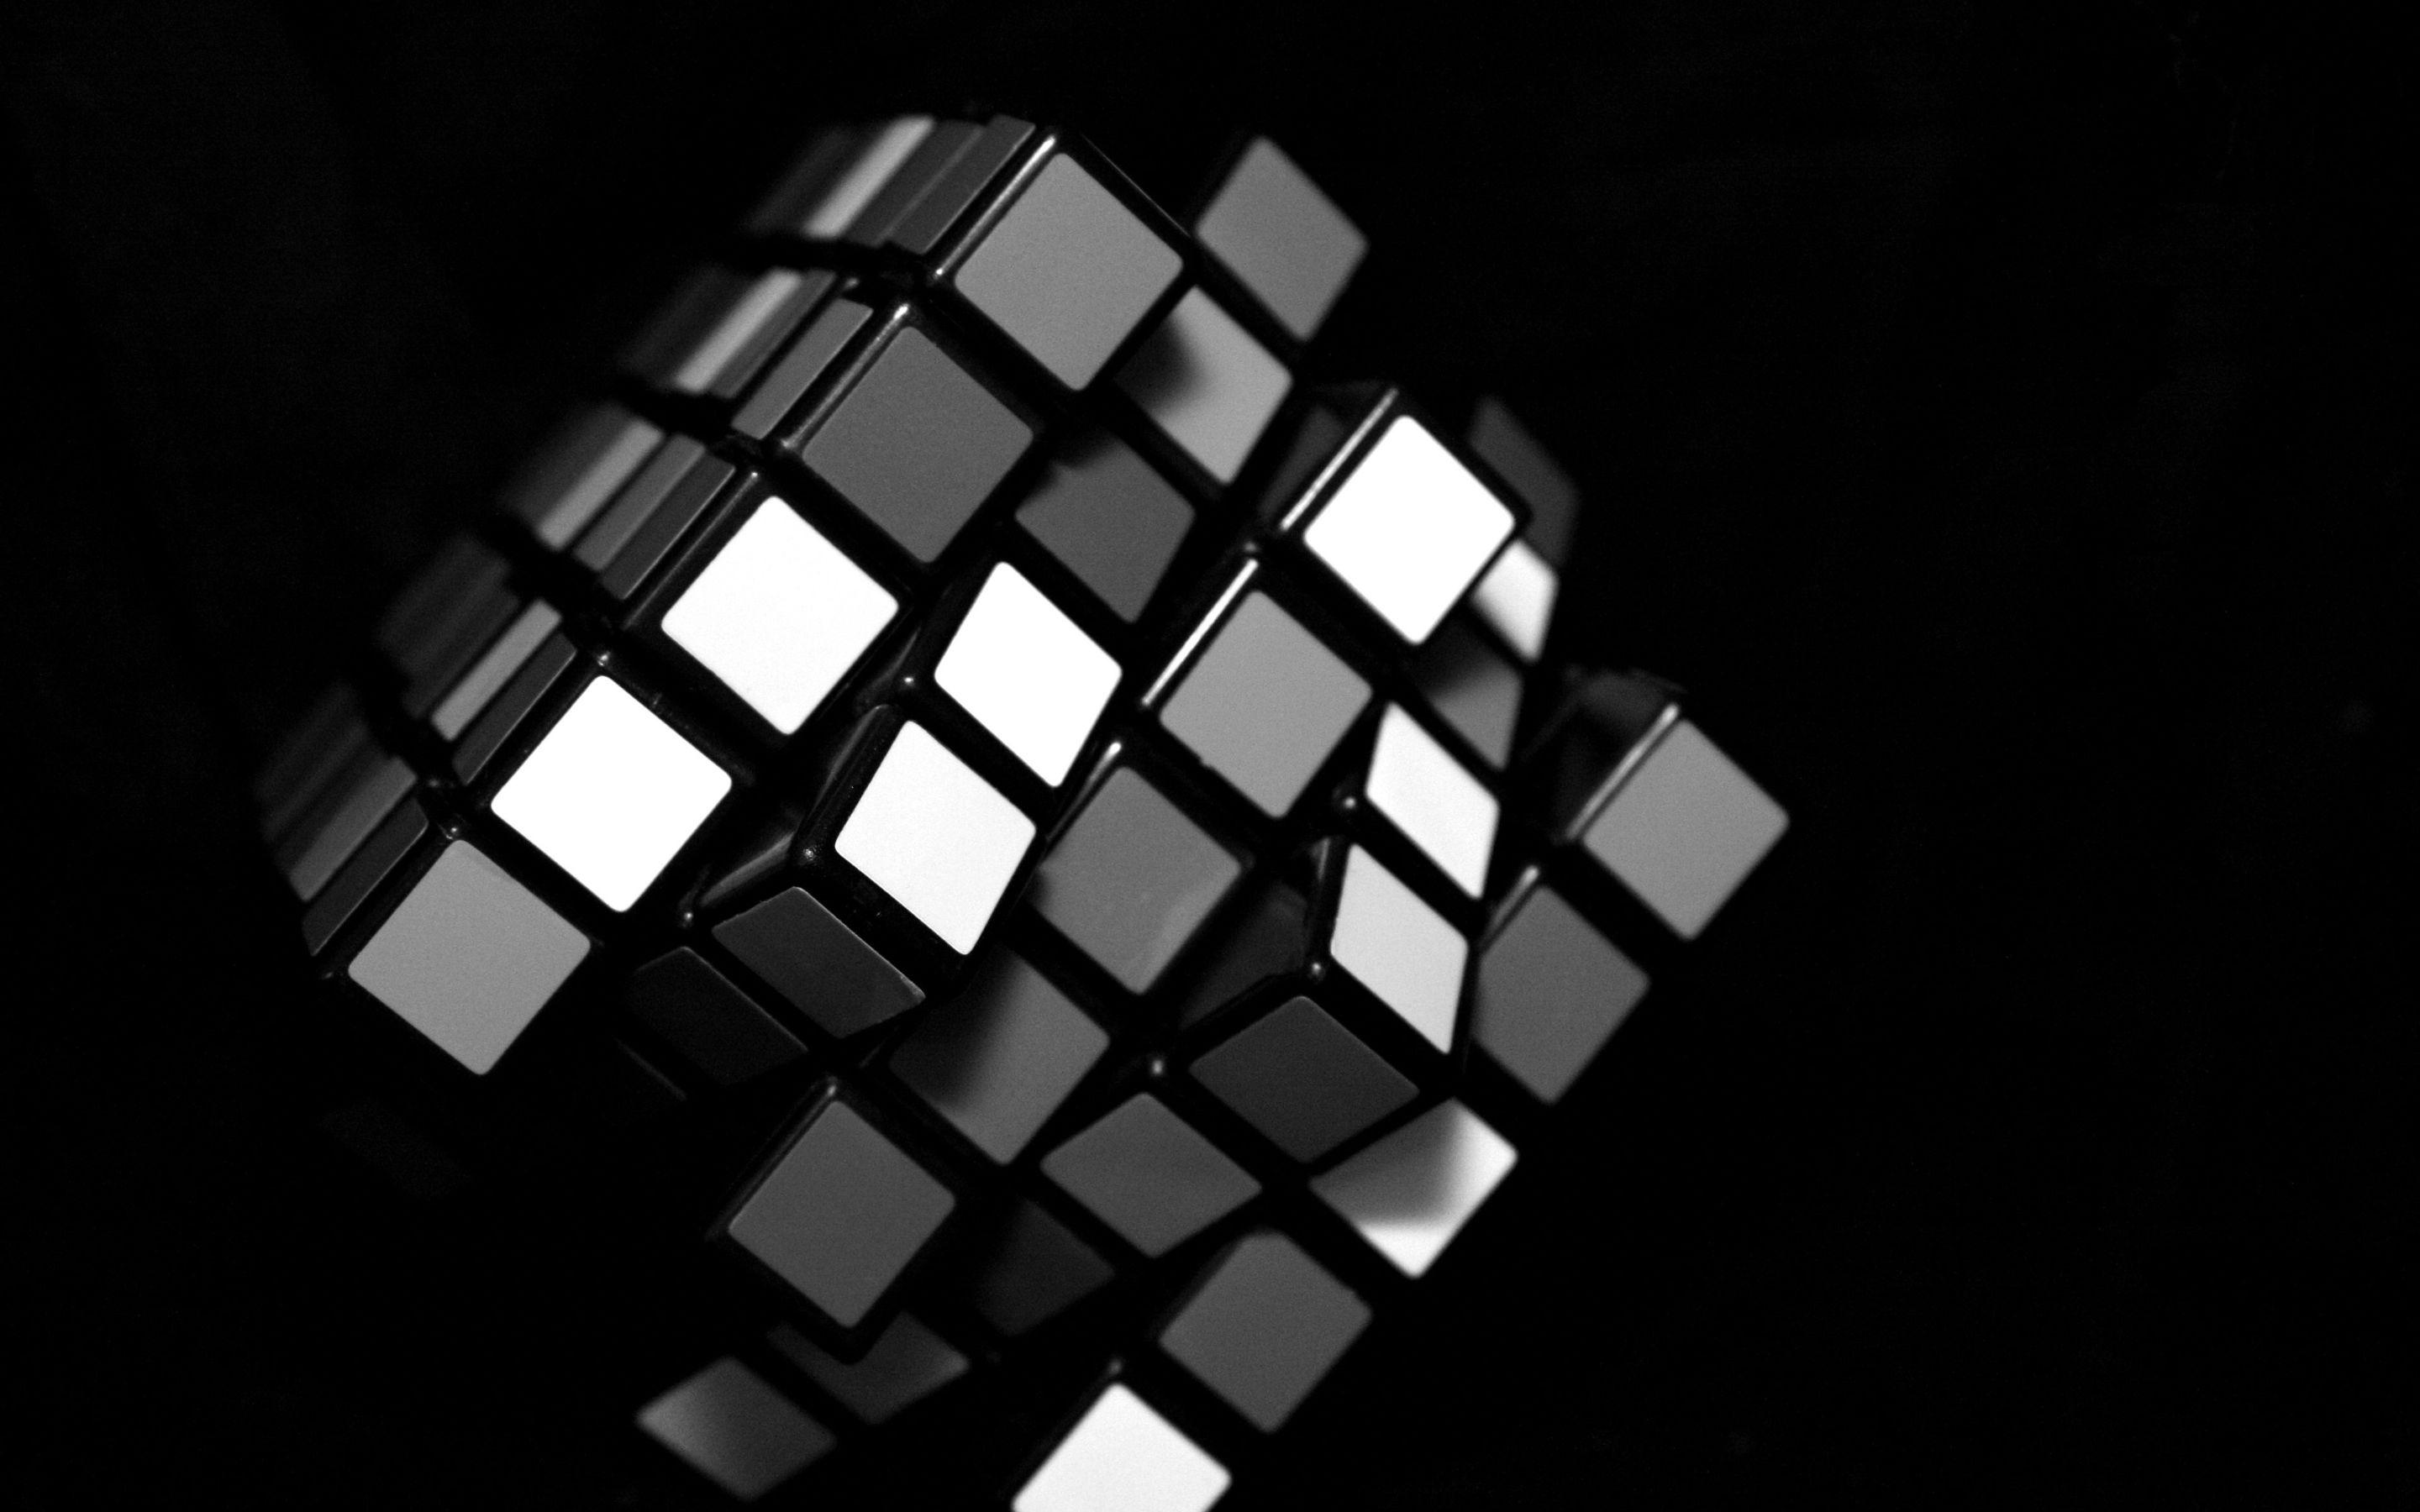 Wallpaper Blink of Cube Wallpaper HD for Android, Windows